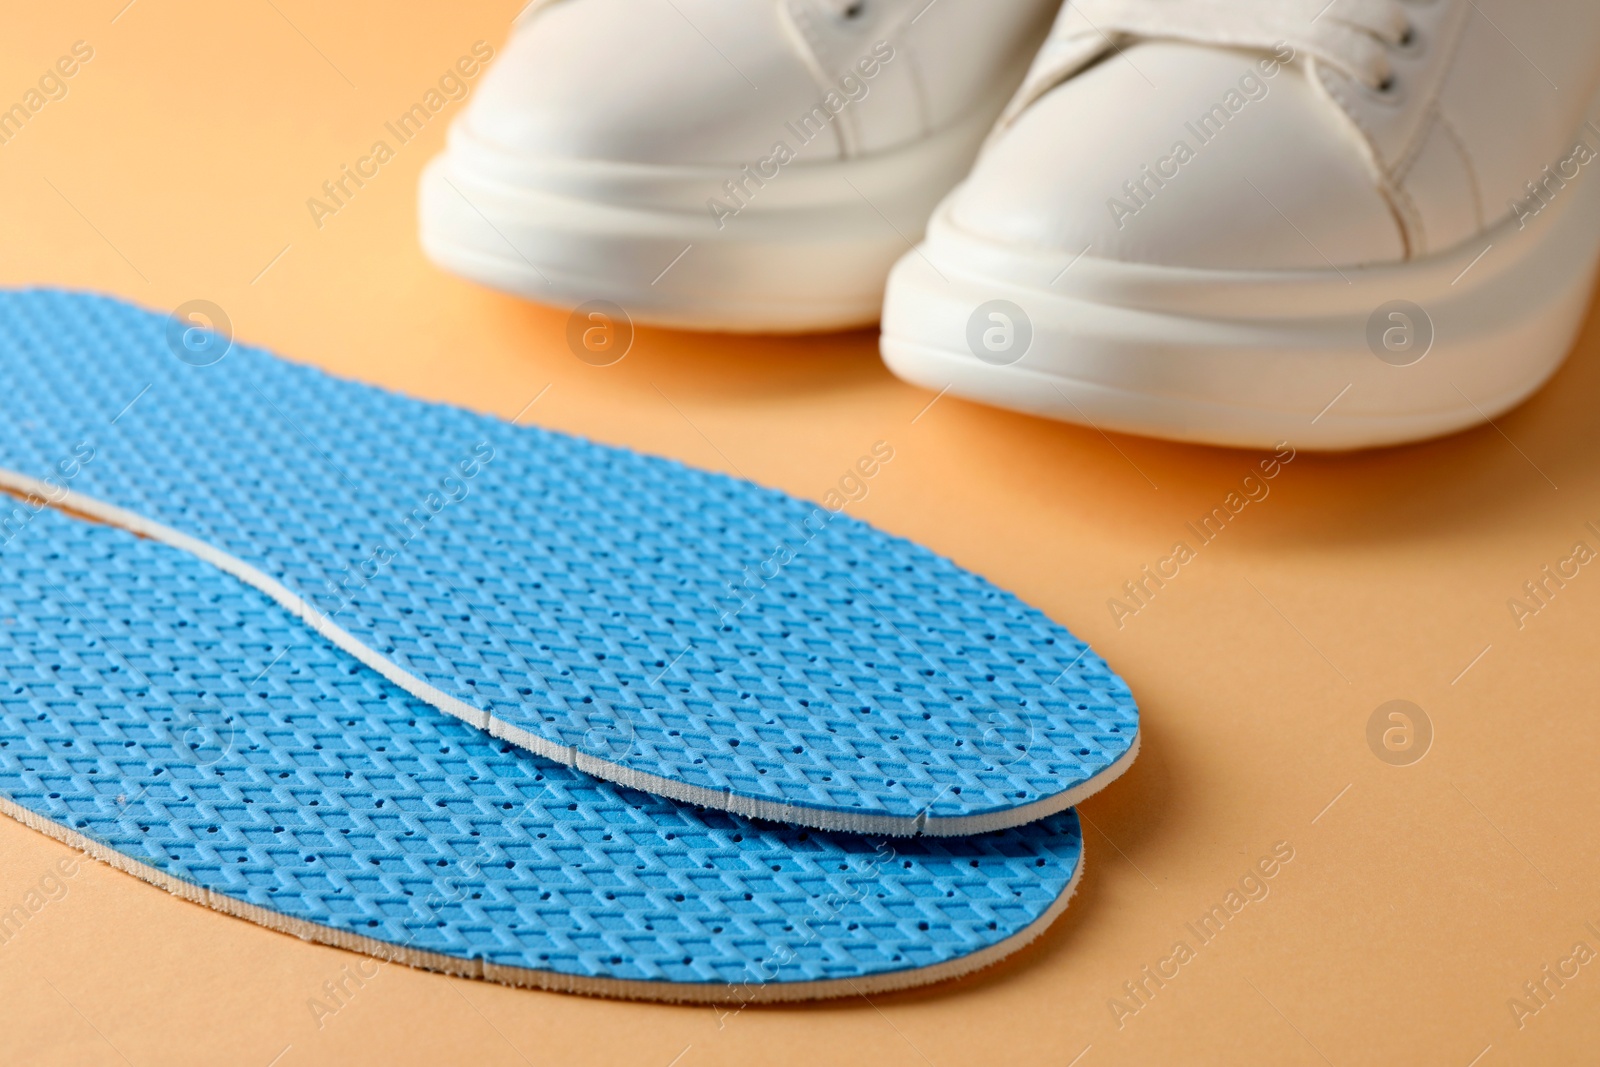 Photo of Pair of insoles and shoes on pale orange background